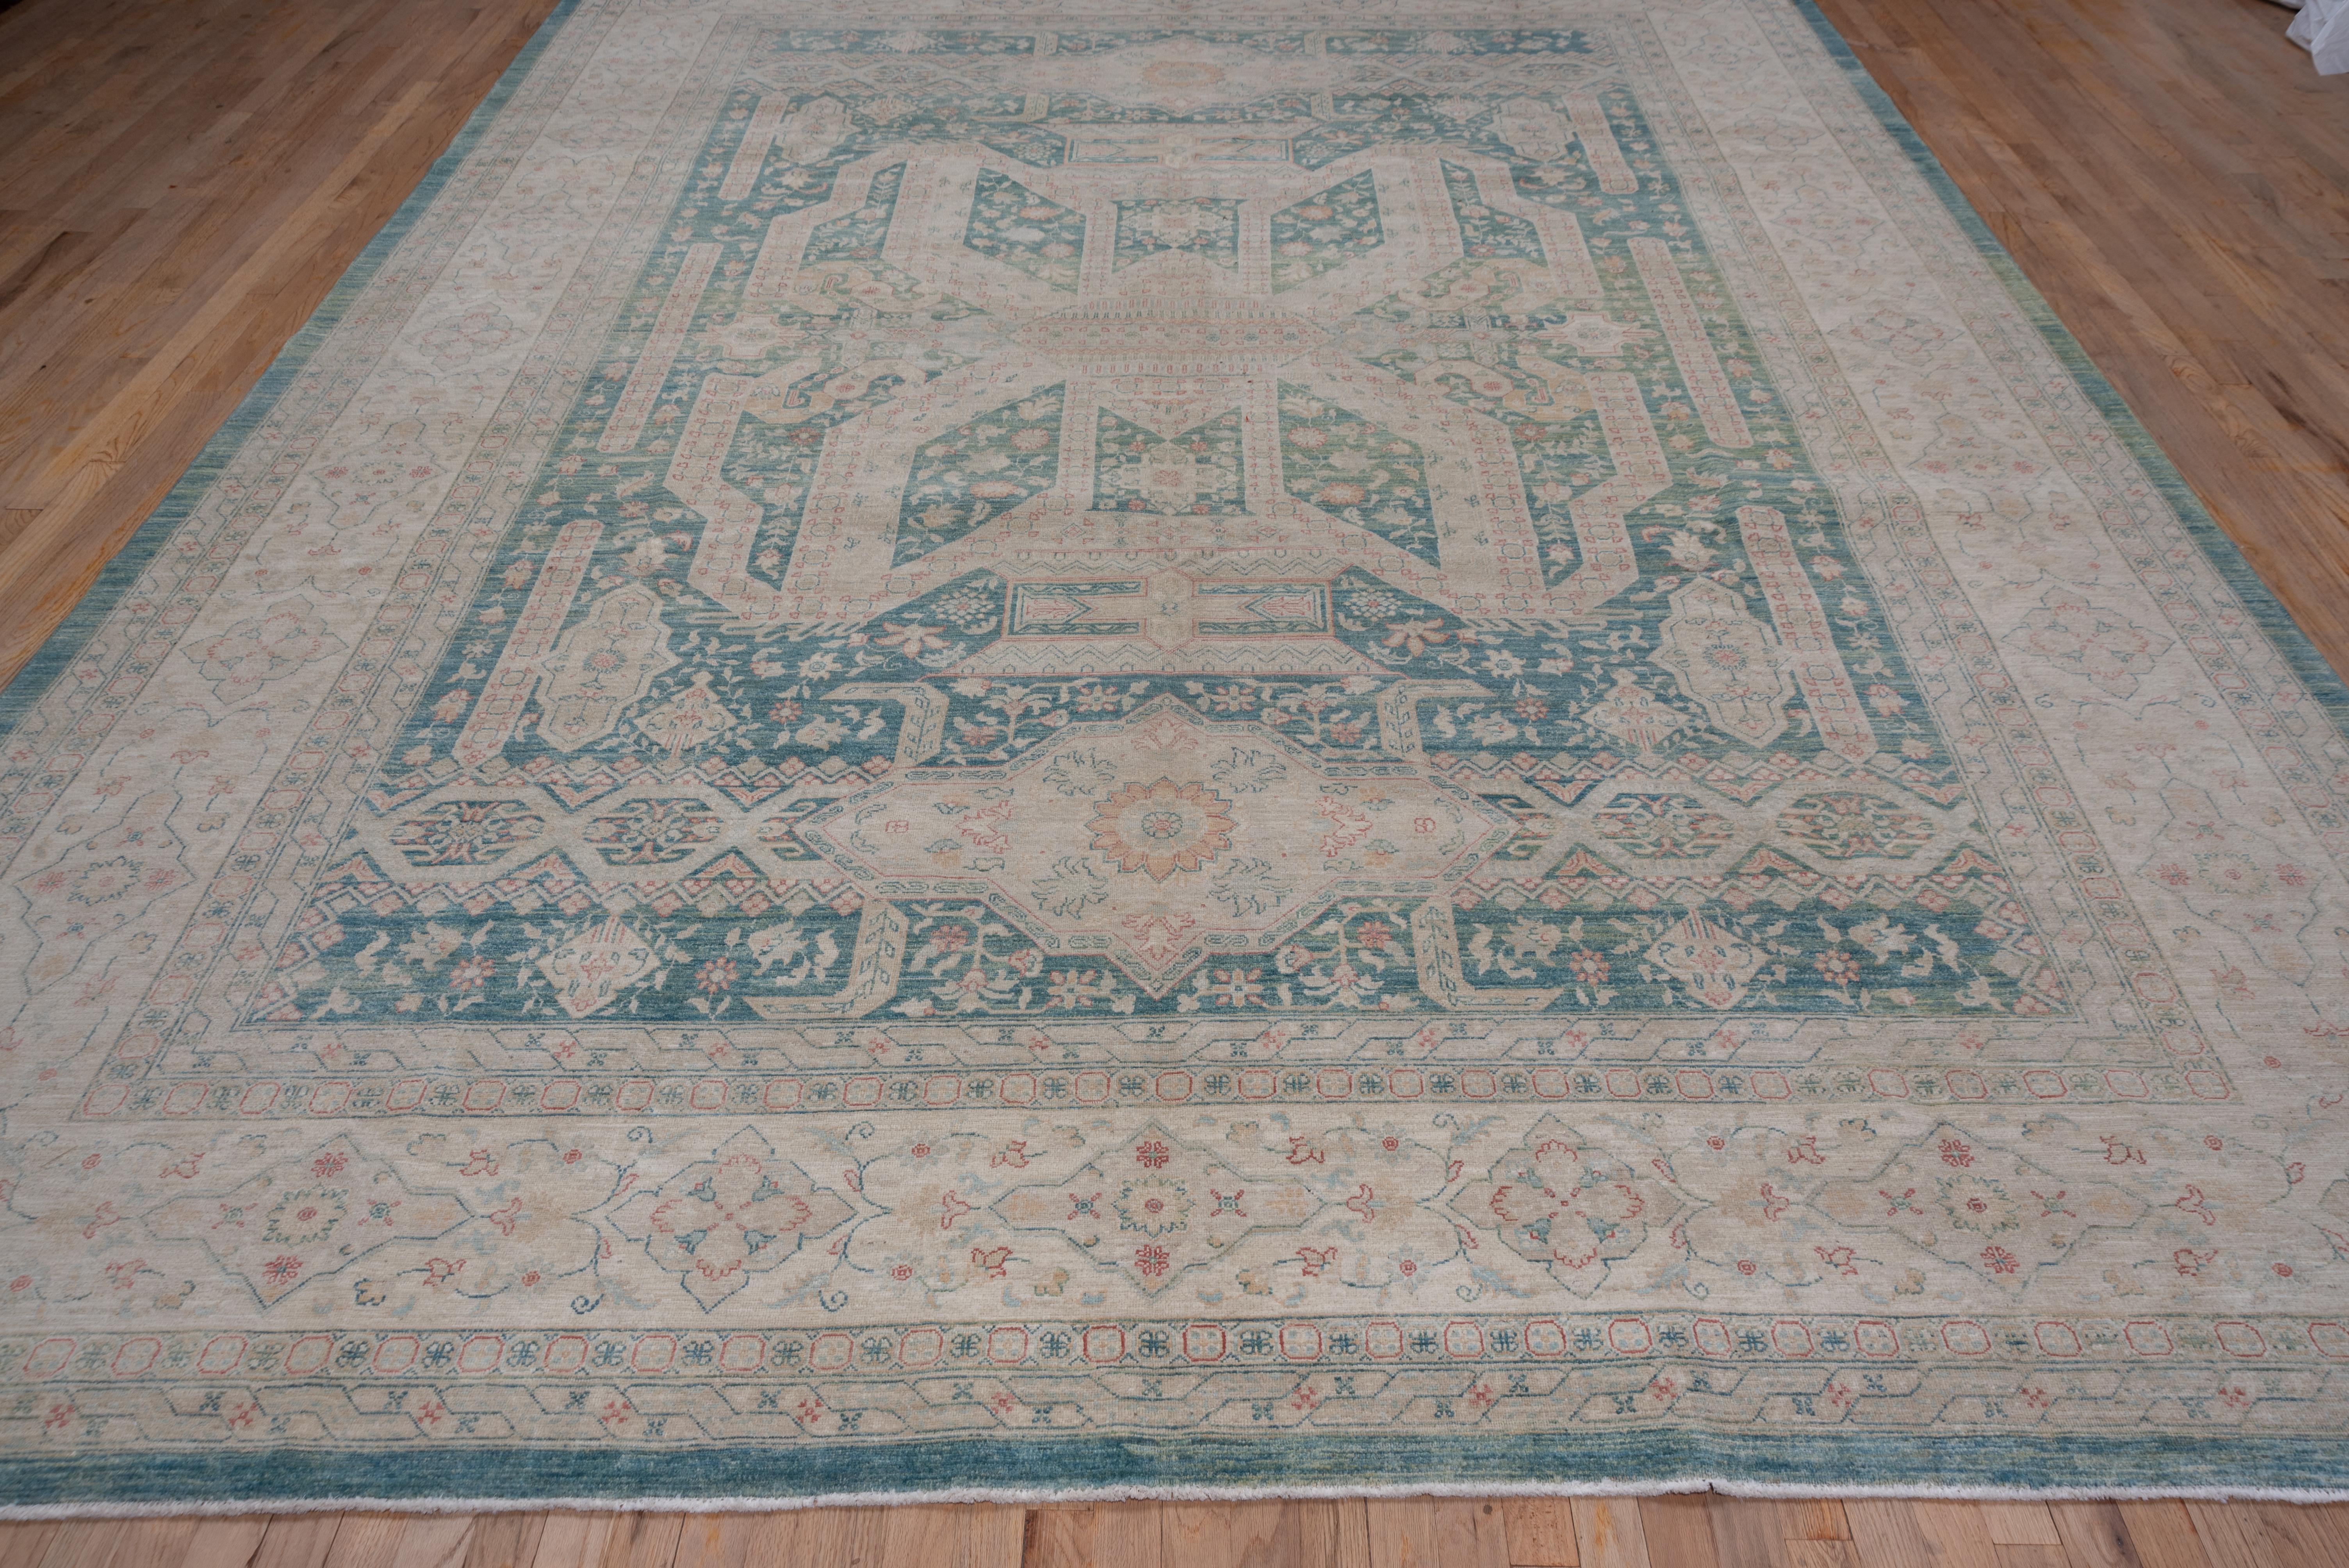 This gorgeous rug is a hand-knotted beauty from Afghanistan. Intricate florals woven beautifully into the more structured lines of the geometric grid. Wonderful color palette that would work nicely in a formal space or equally perfect in a bedroom.